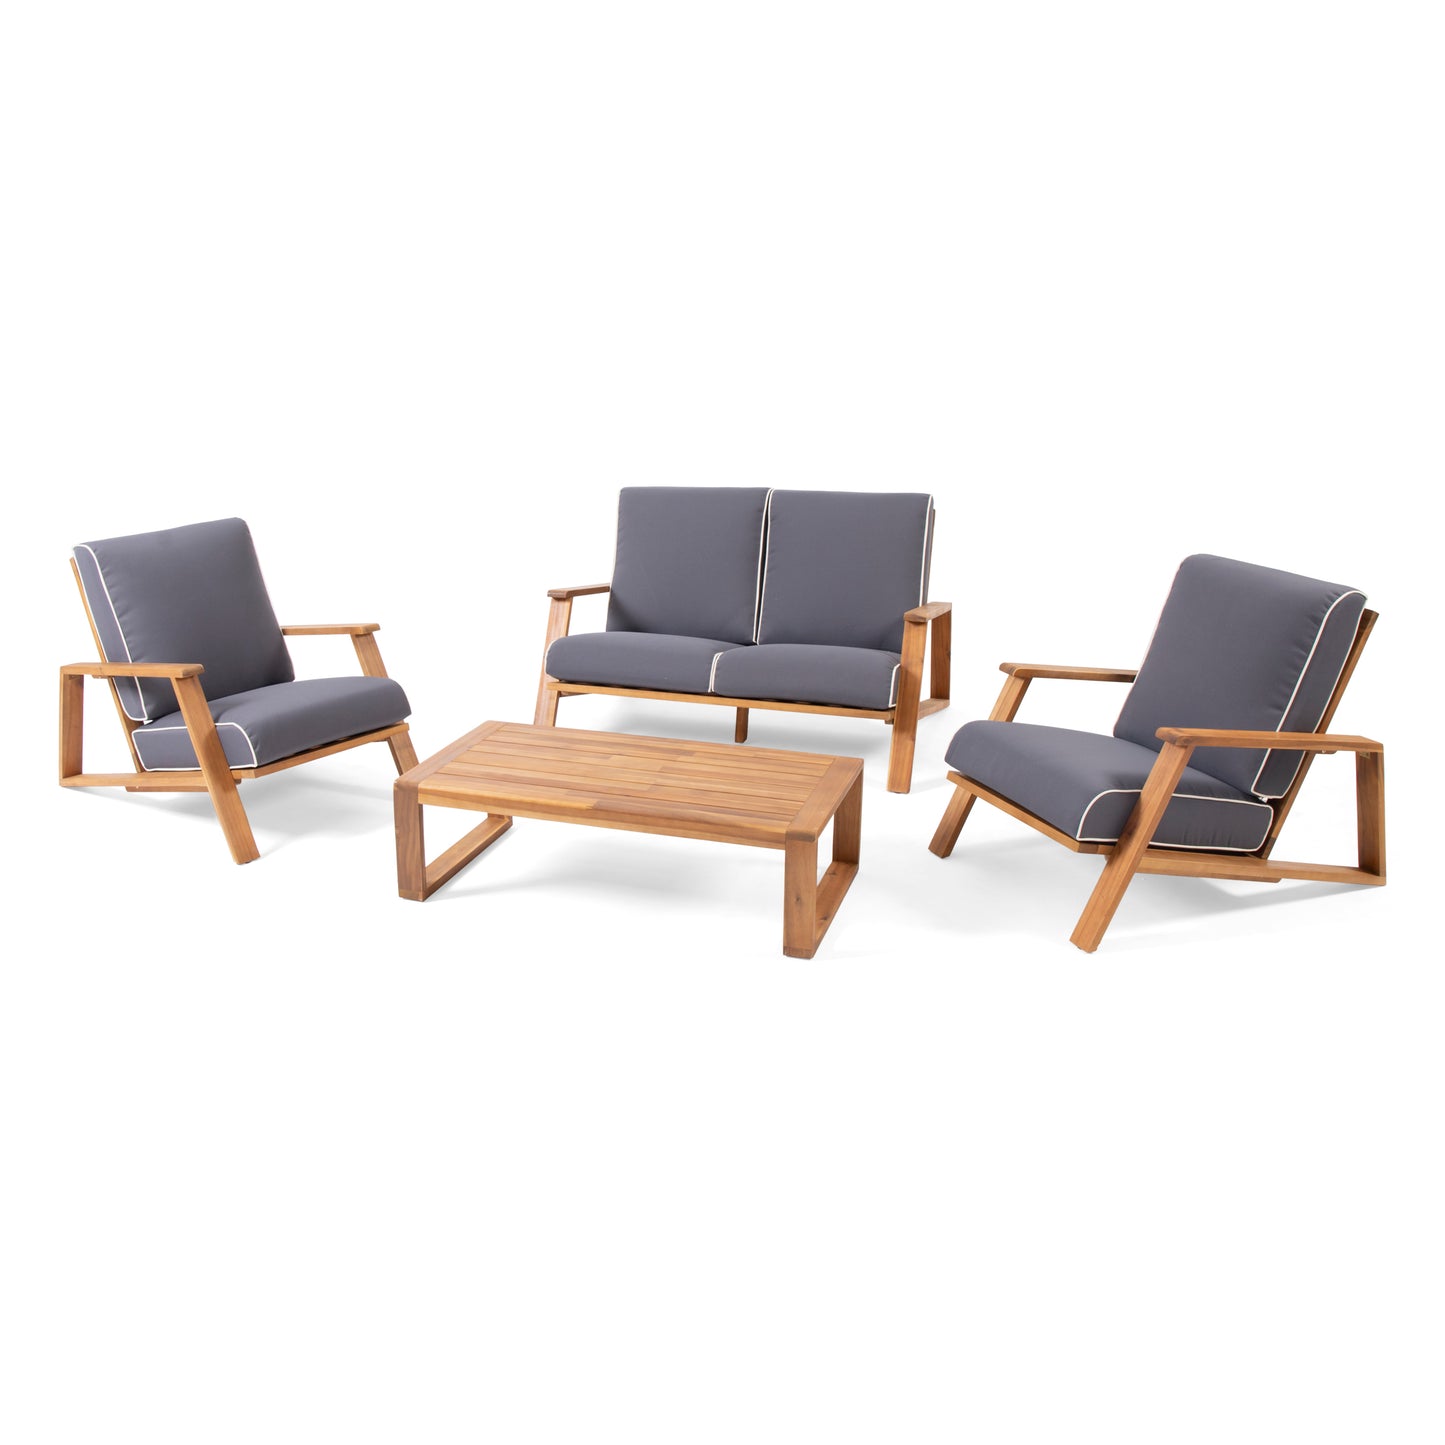 Youssef Outdoor Acacia Wood 4 Seater Chat Set with Cushions